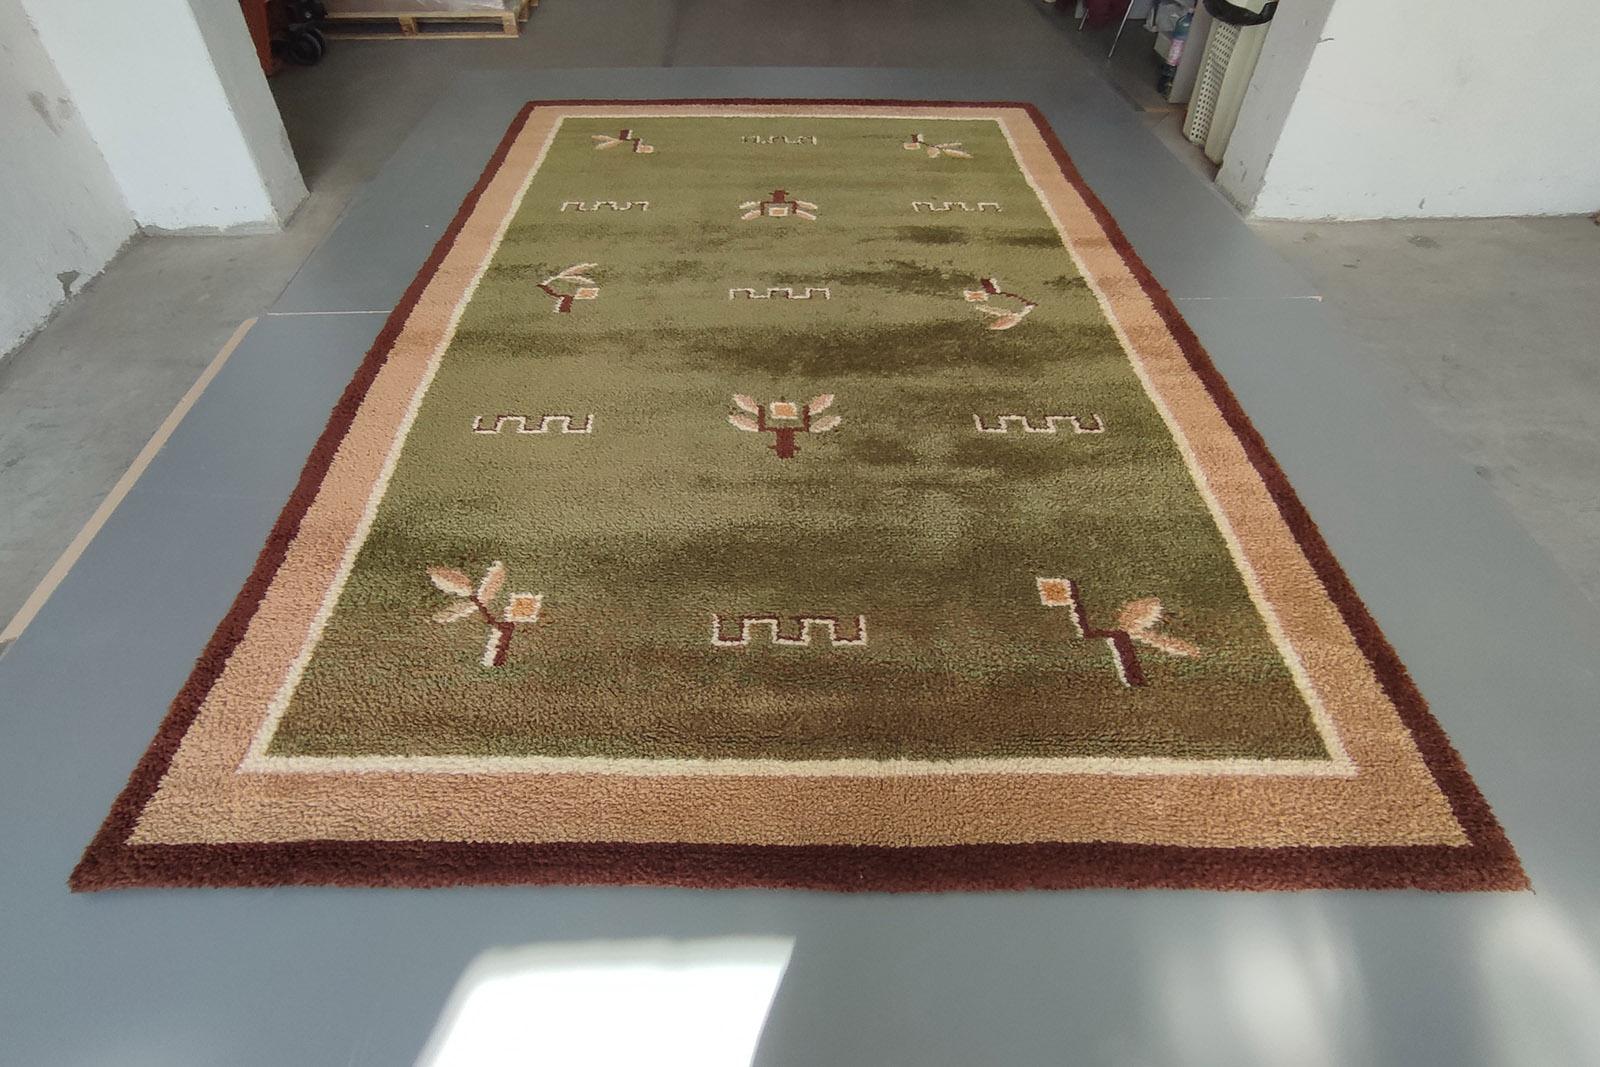 Beautiful sol moss green rug, made of Hand Spun Baby Lambs Wool, in warm shades of green and beige, hand-knotted, stylized floral décor, large size 200x310cm (6.56' x 10.17').
In excellent condition, and professionally washed, this rug is ready to